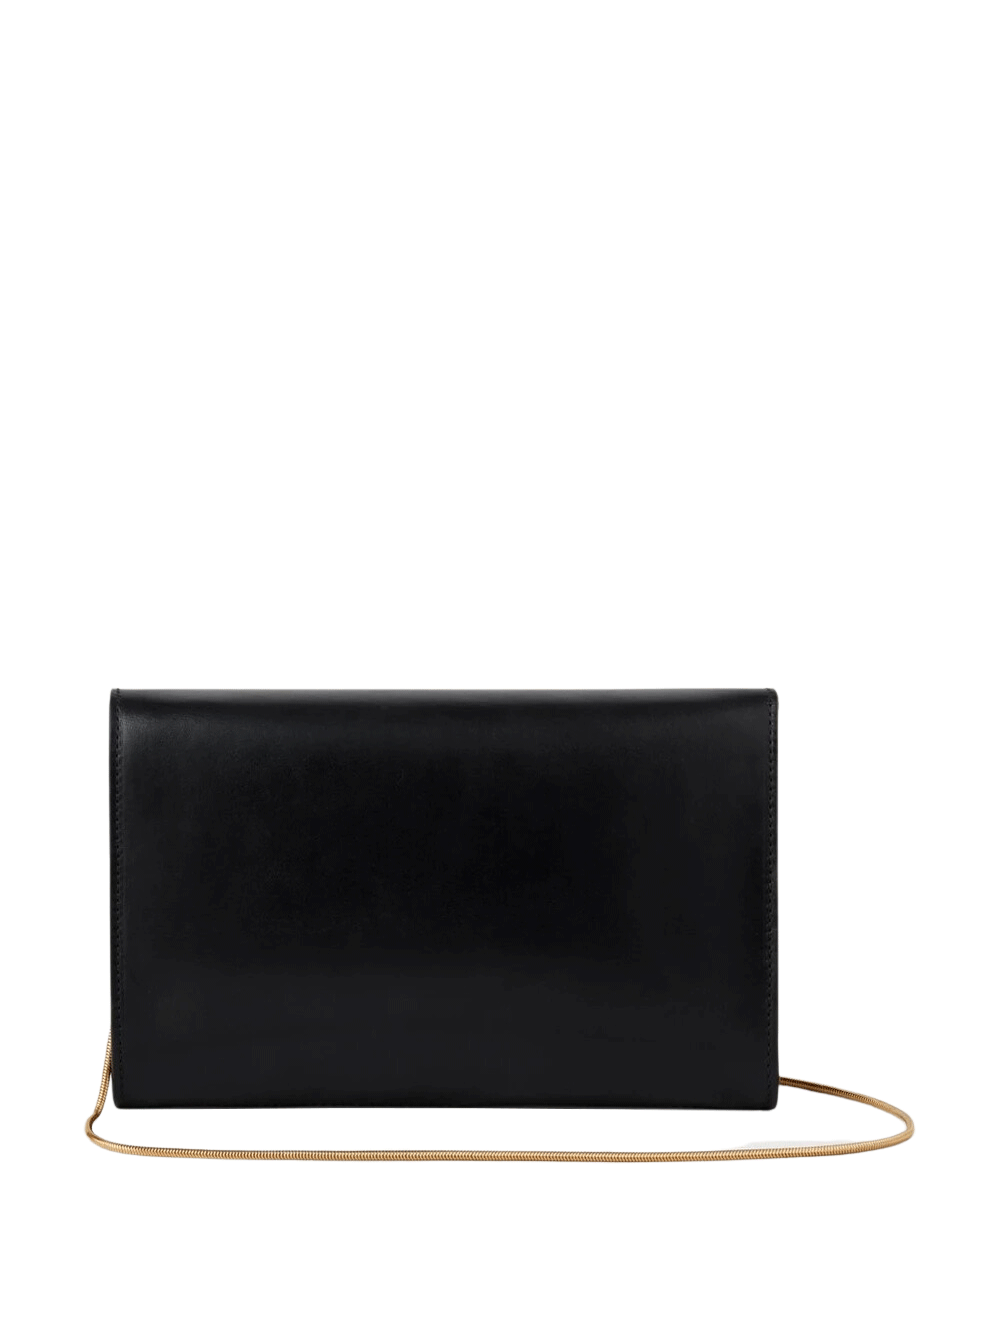 Mulberry-Lana-Clutch-High-Gloss-Leather-Black-2